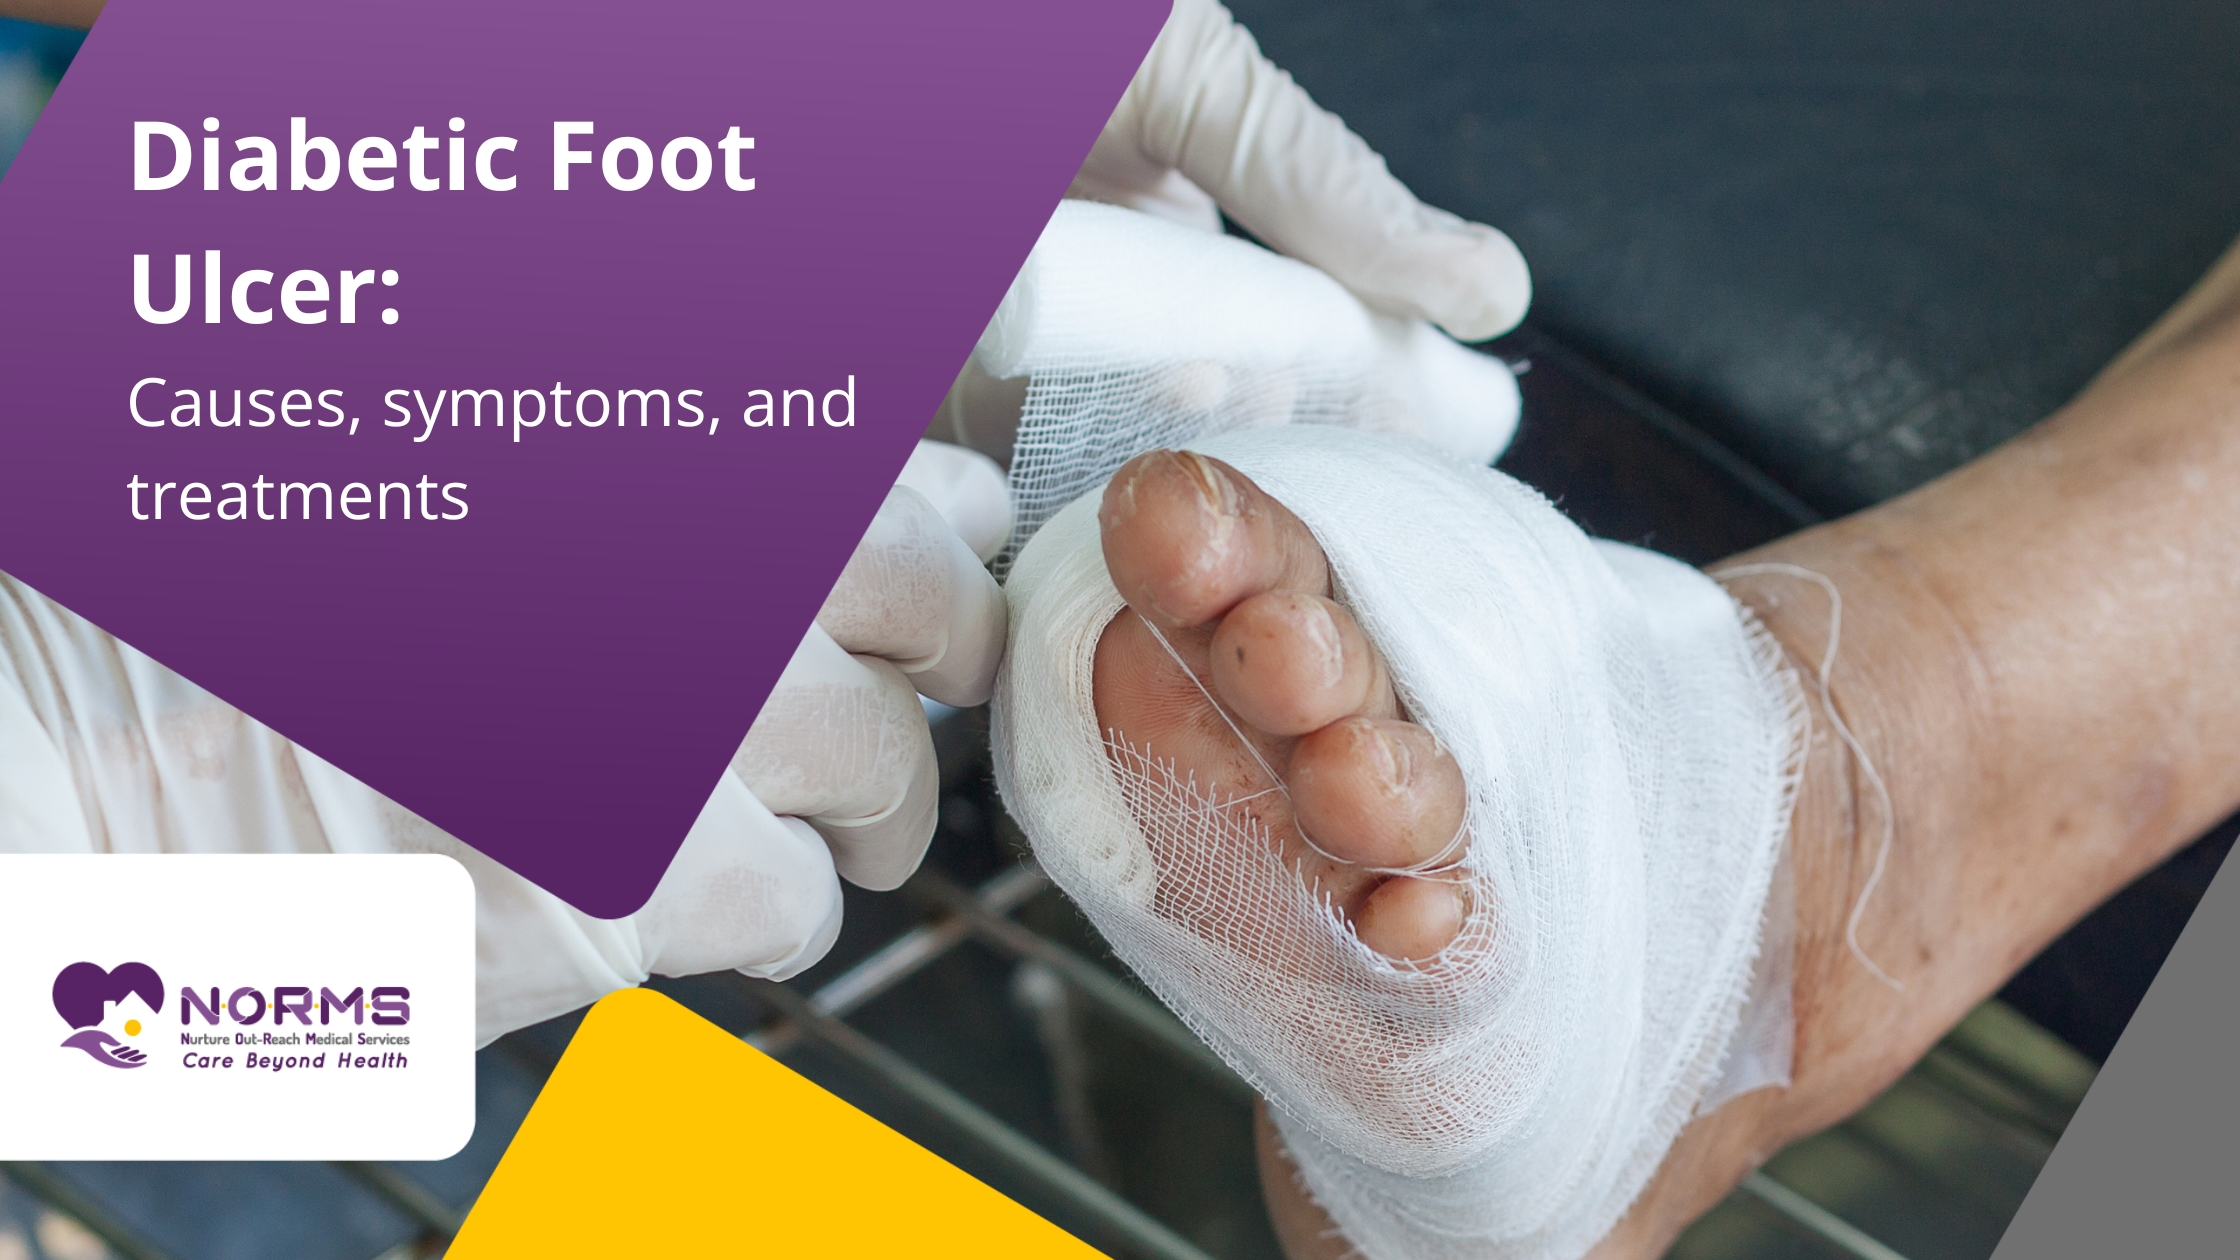 Diabetic Foot Ulcer: Causes, symptoms and treatments